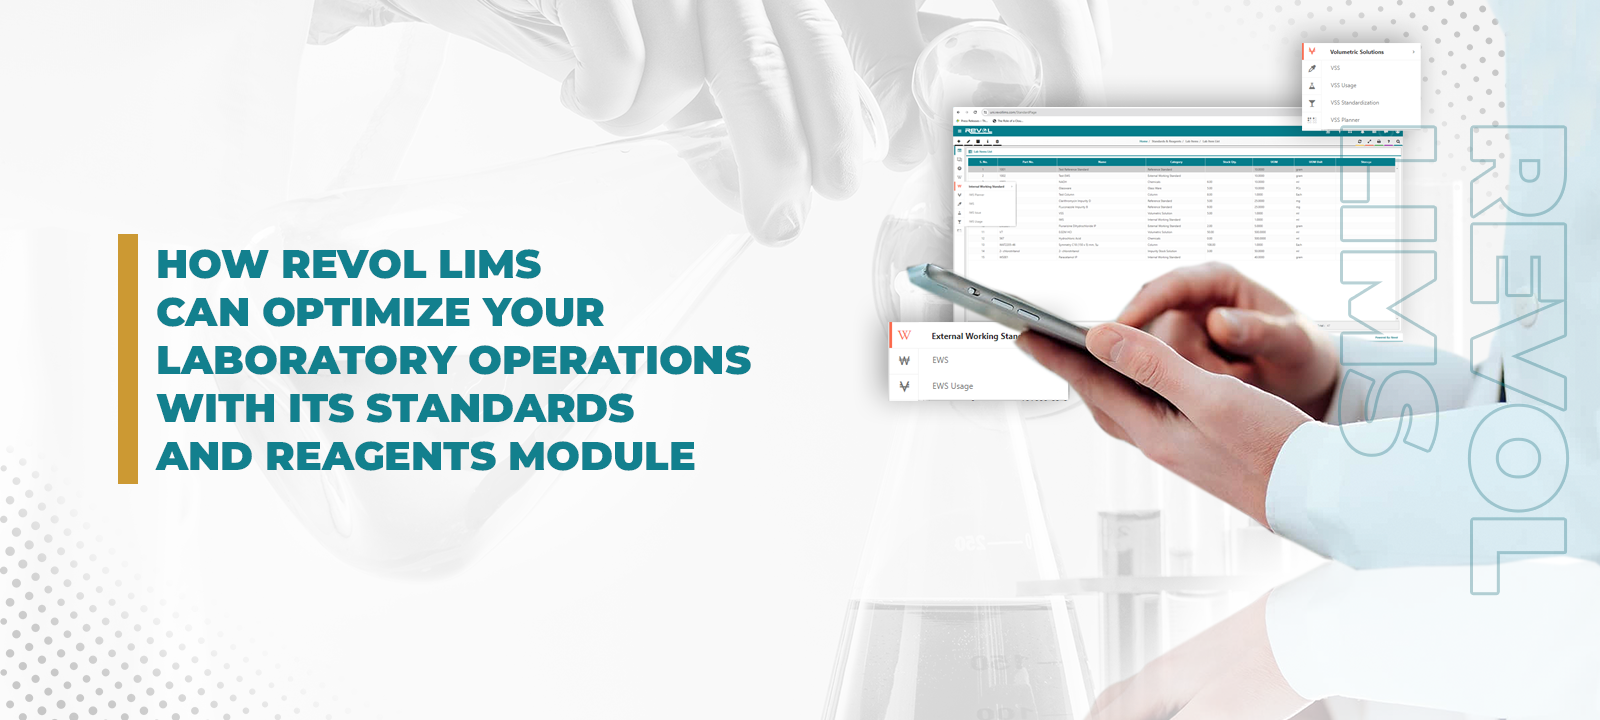 Banner for Revol LIMS, a laboratory operations optimization software, with a scientist using the software on a tablet and laboratory equipment in the background.